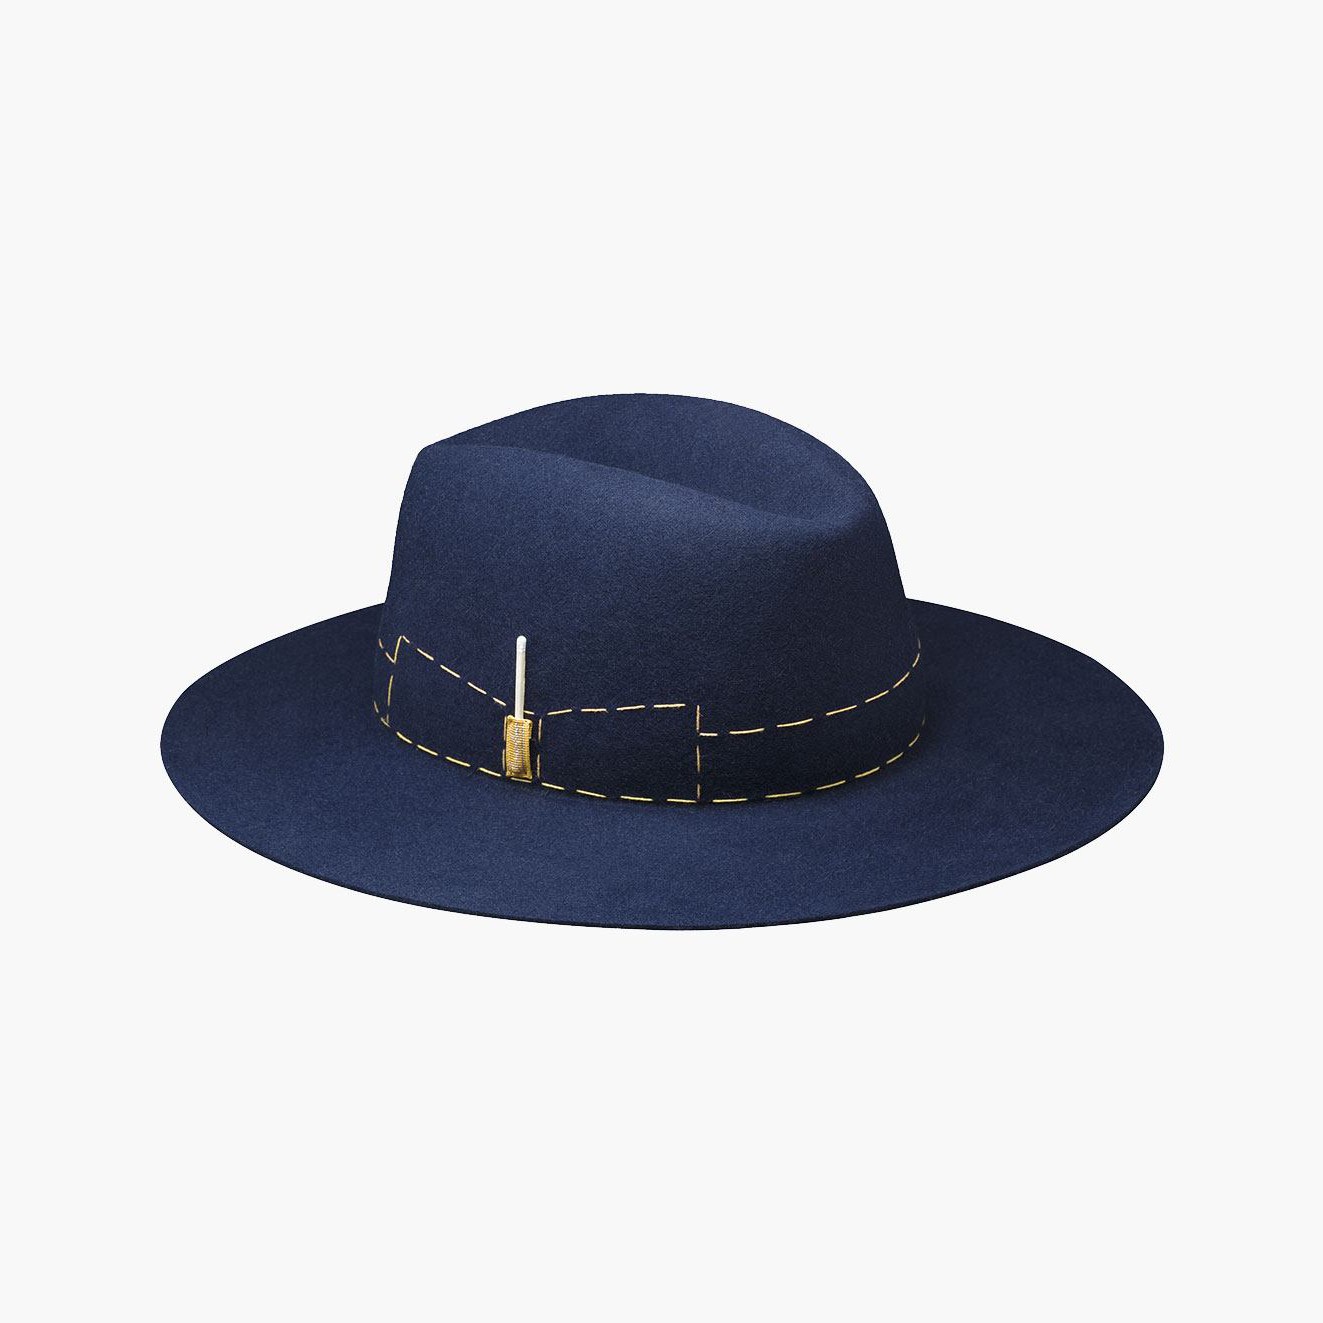 Borsalino by Nick Fouquet – FW16-17 Capsule Collection